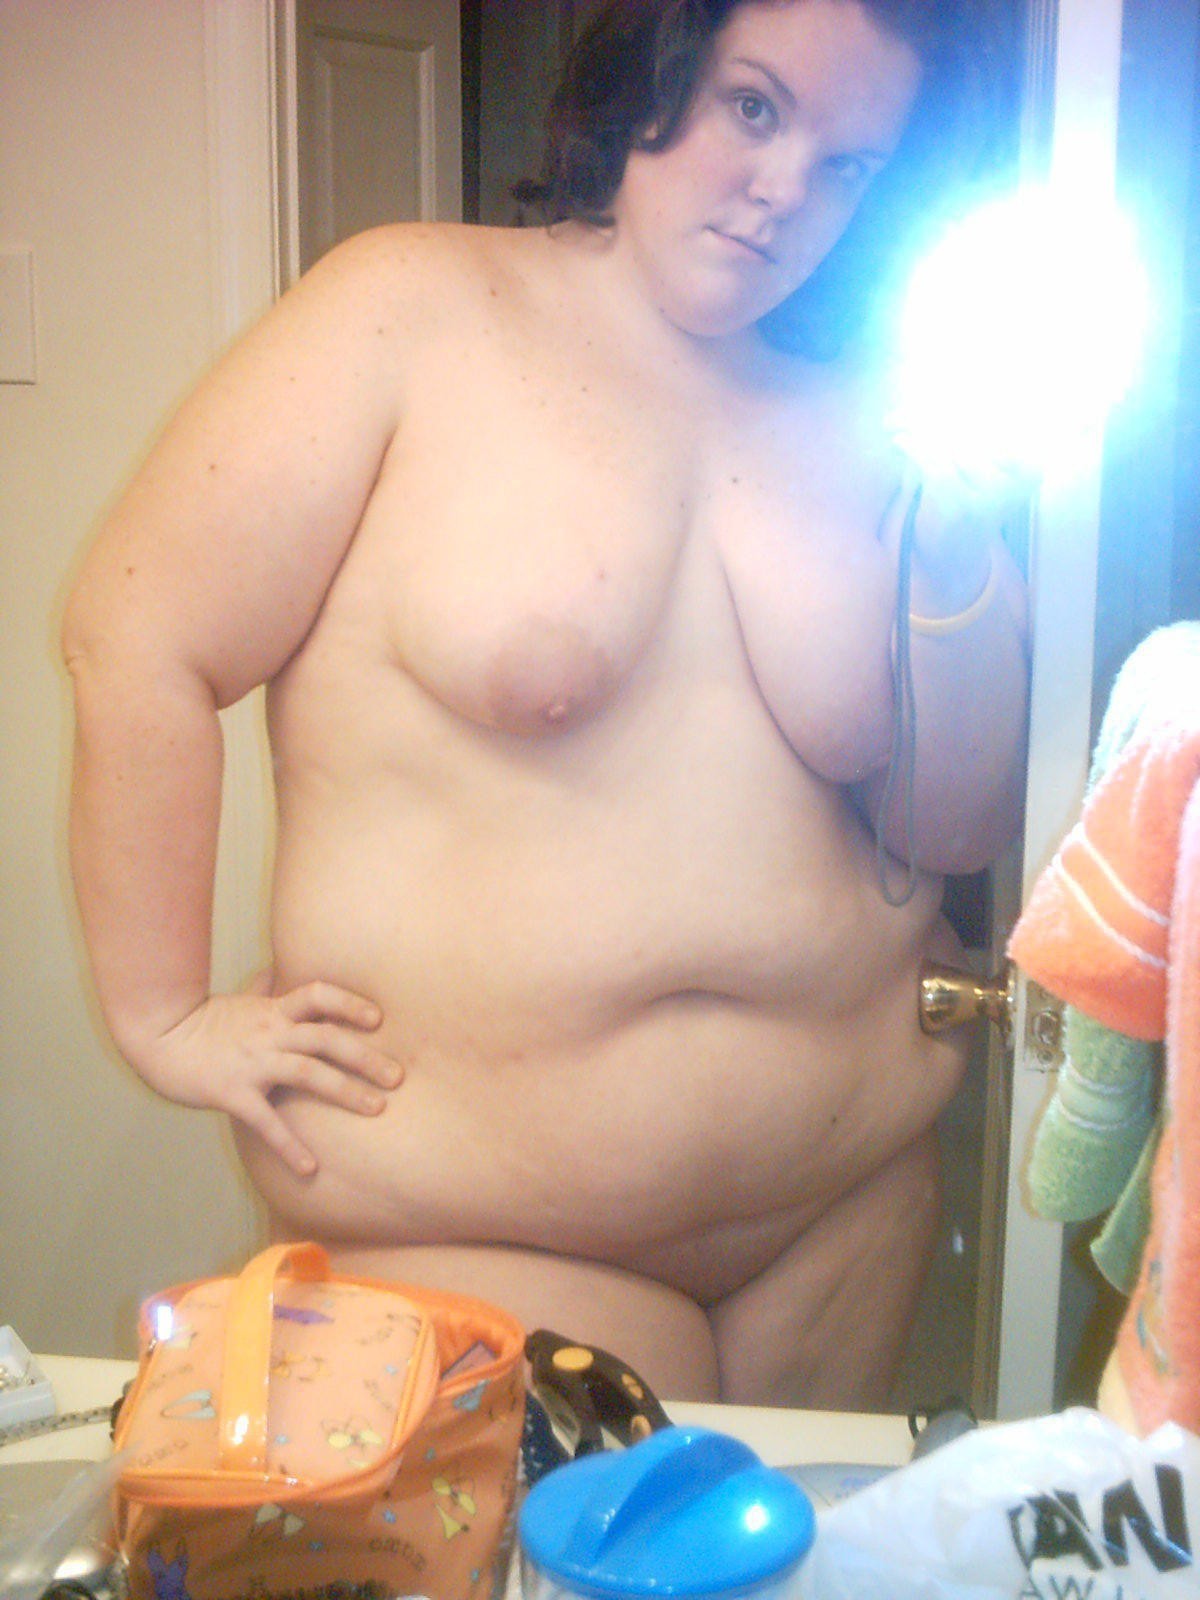 bbw-horny-hookers:  Hot large girlReal name: Stephanie Pics: 62 Single:  Yes. Looking: